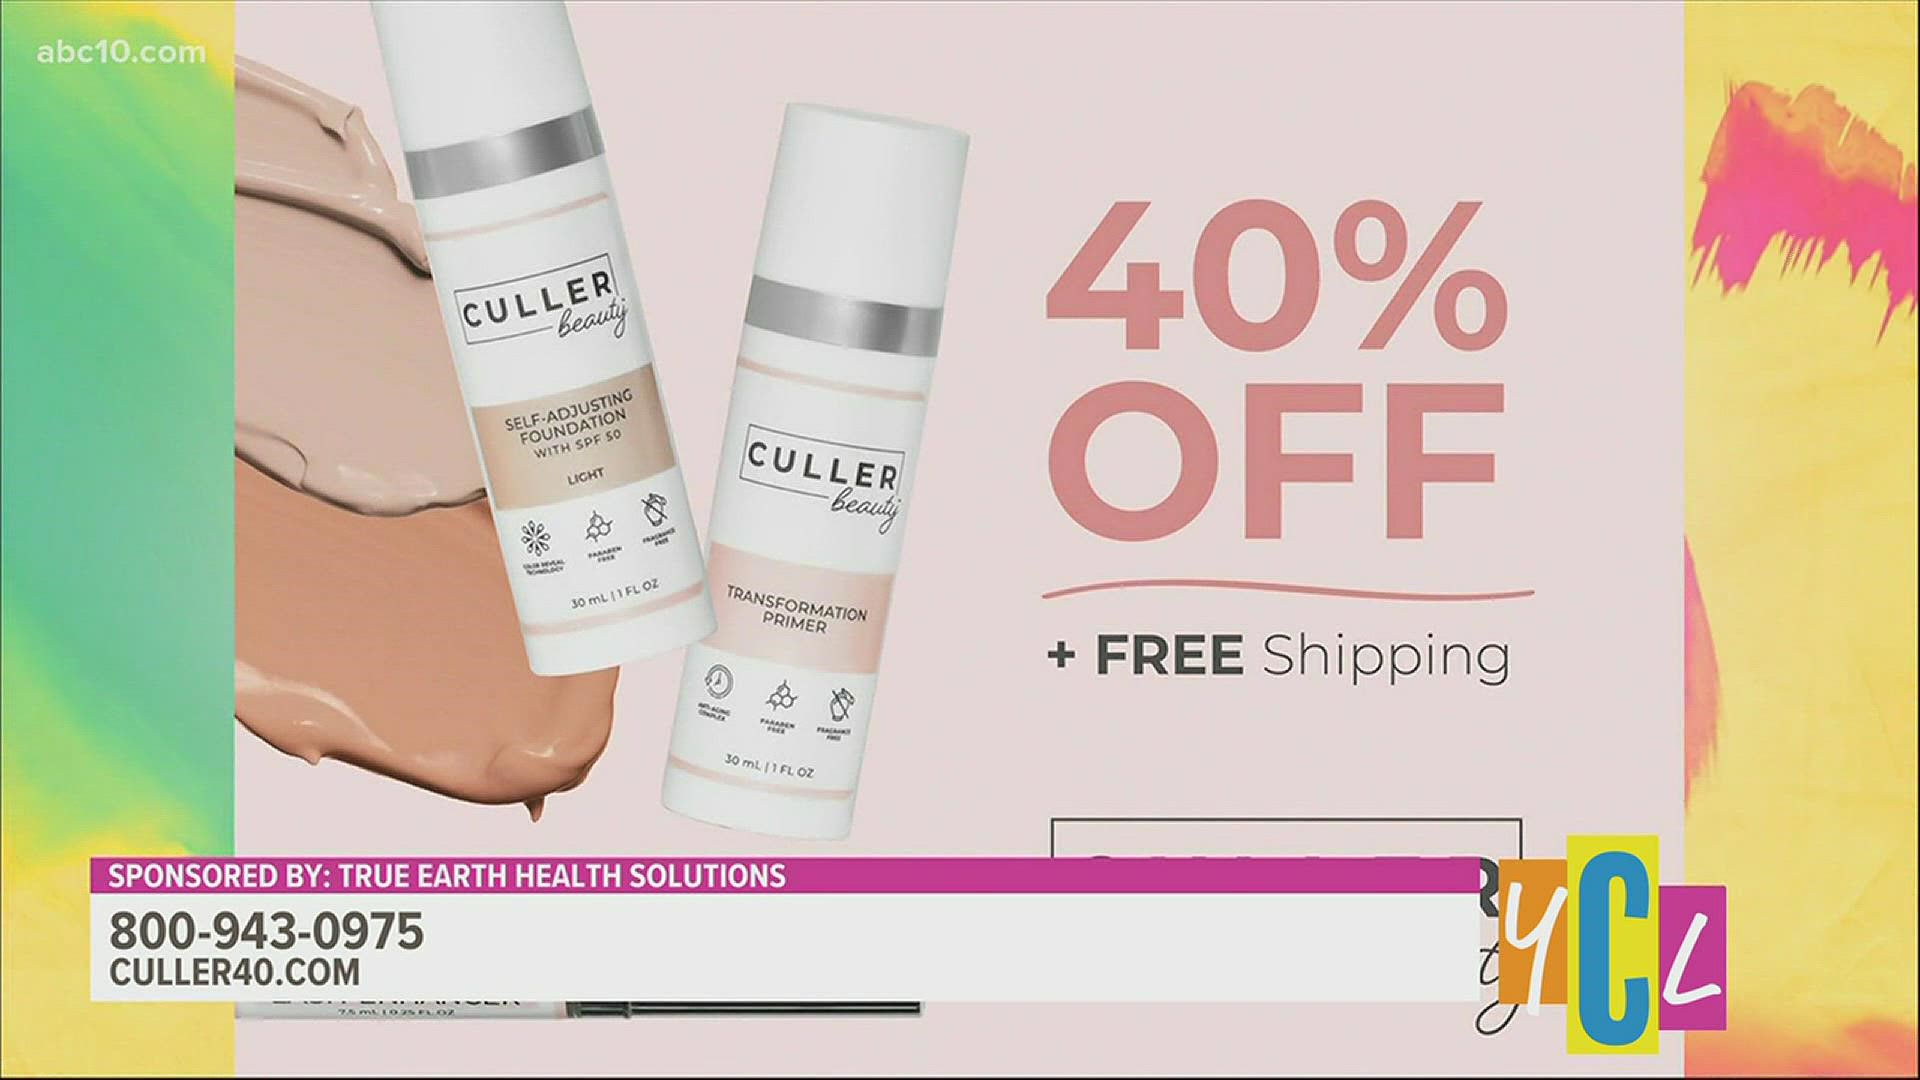 Check out this sweet deal on a color adjusting foundation that's taking the guess work out of makeup purchases. This segment paid for by True Earth Health Solutions.